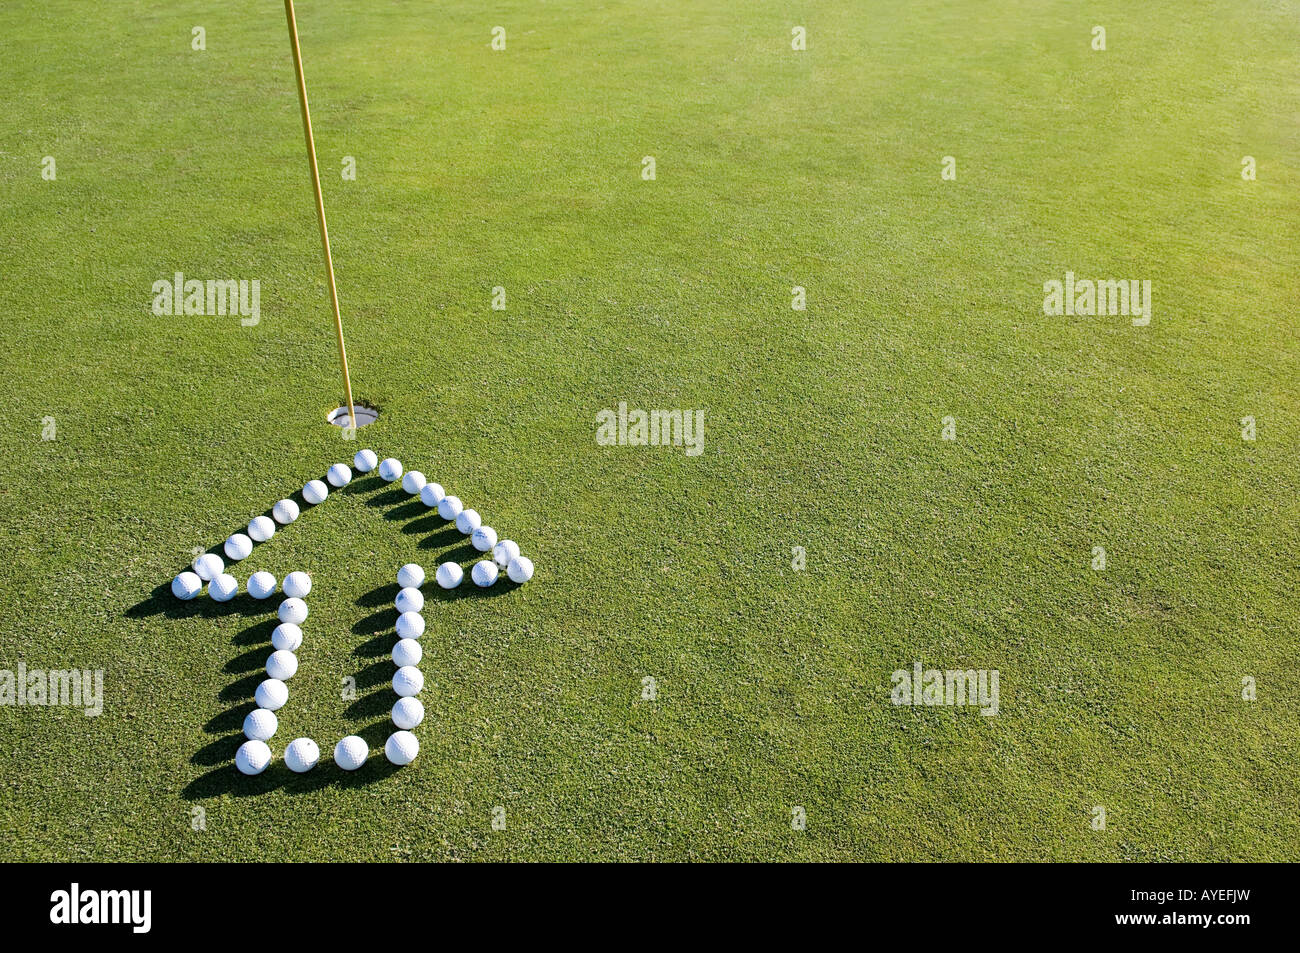 An arrow pointing to a hole on a golf green Stock Photo